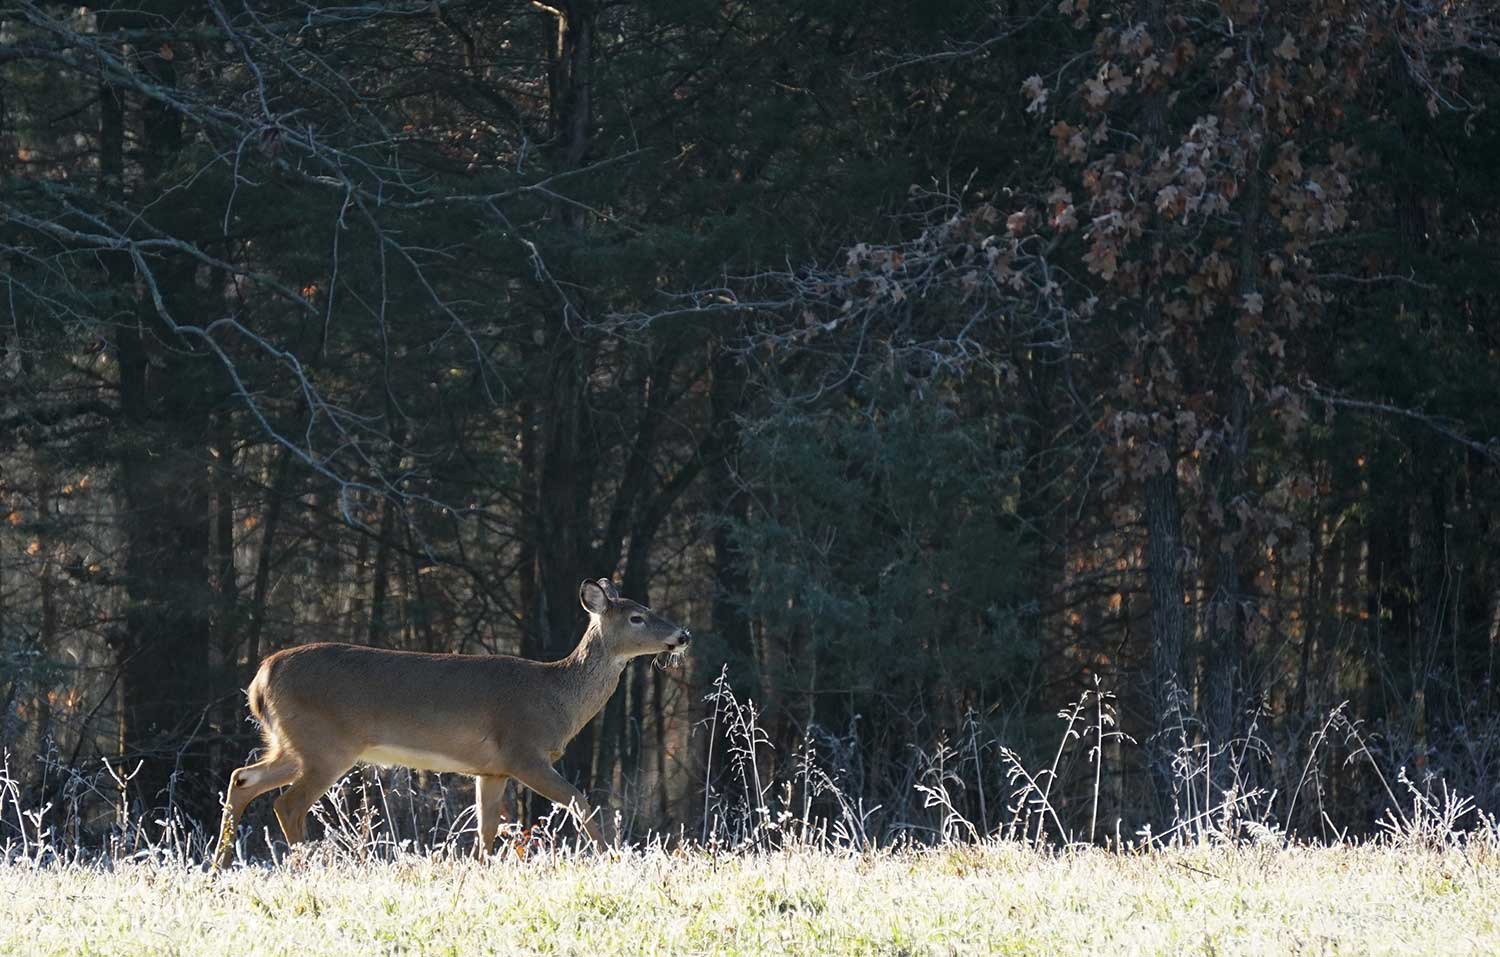 A whitetail doe walking through a field during the daytime.